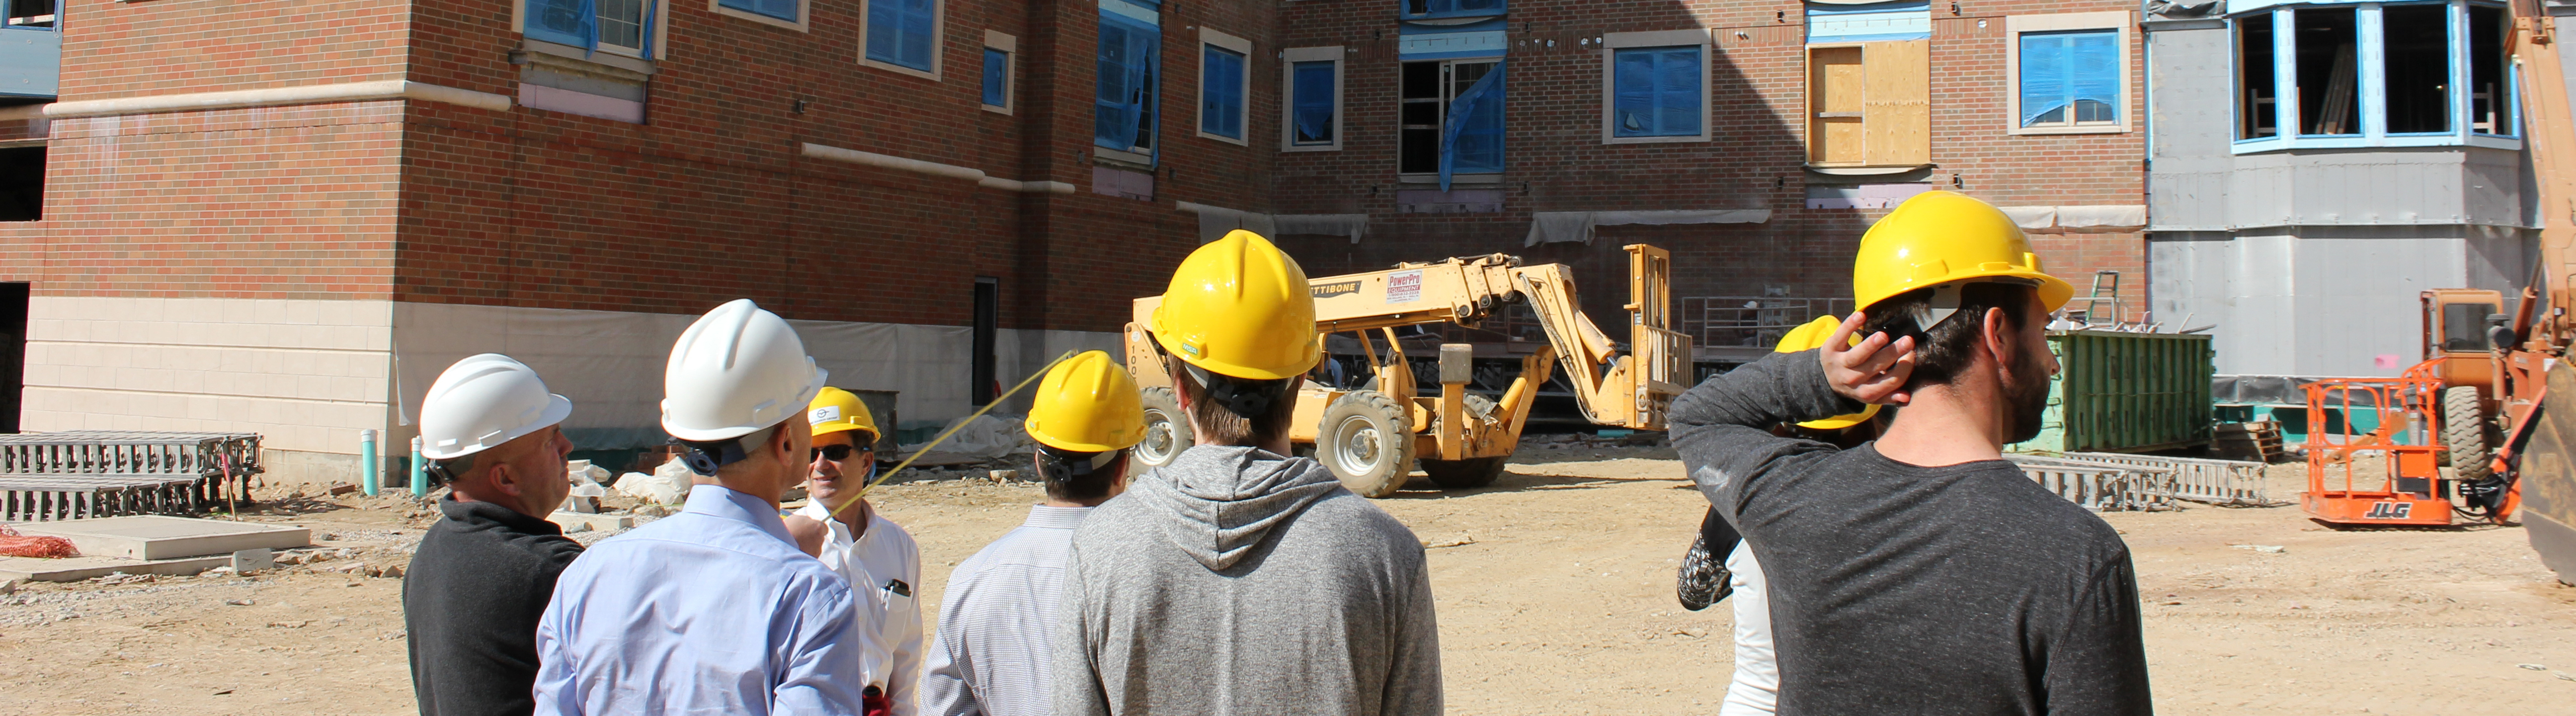 Students on construction site